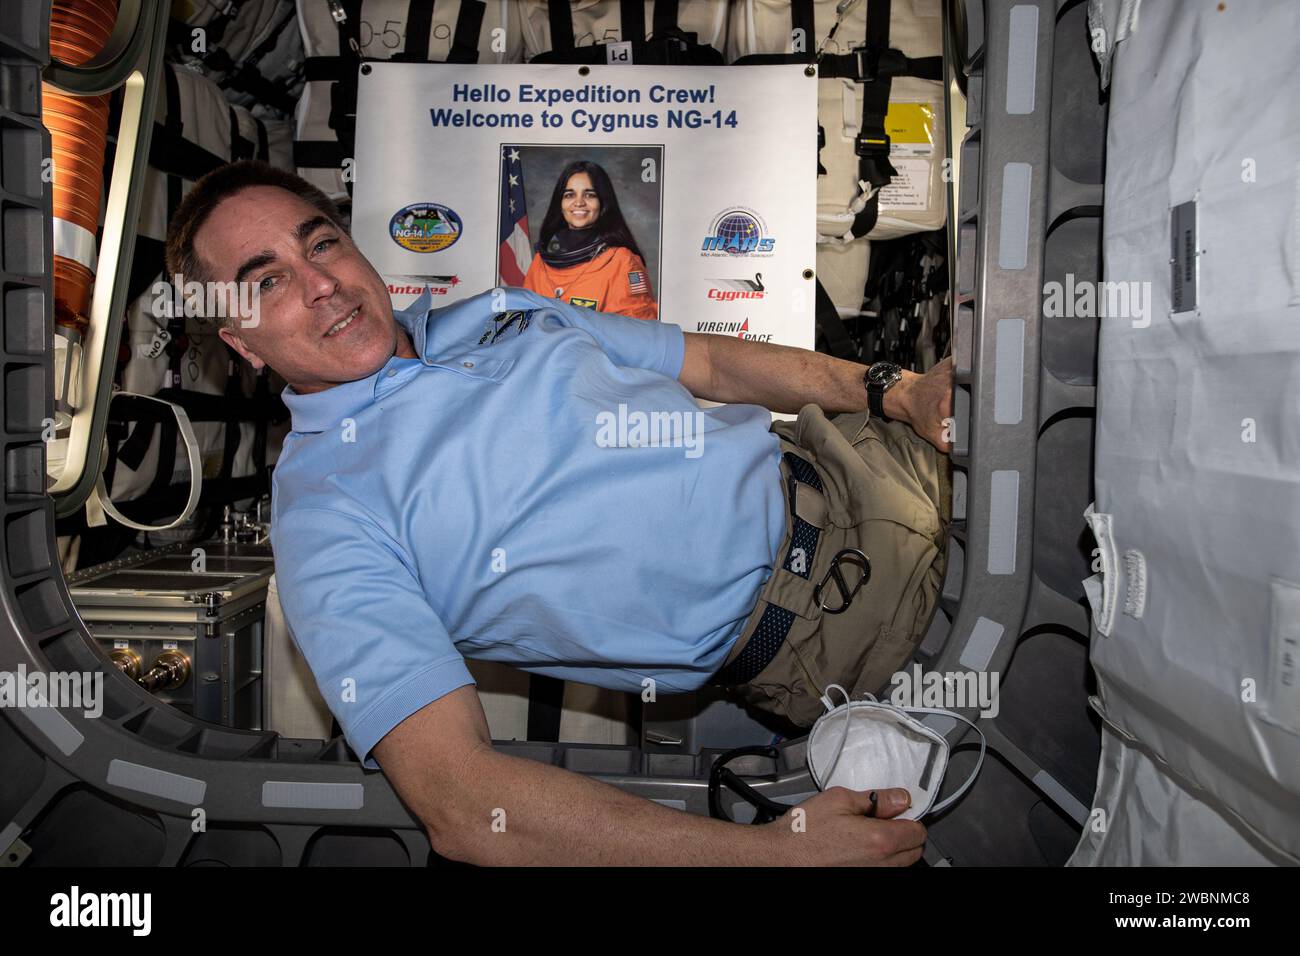 iss063e103888 (Oct. 5, 2020) --- NASA astronaut and Expedition 63 Commander Chris Cassidy is pictured inside the Northrop Grumman Cygnus space freighter named the S.S. Kalpana Chawla after the first female astronaut of Indian descent who also perished on the ill-fated STS-107 mission aboard Space Shuttle Columbia. Stock Photo